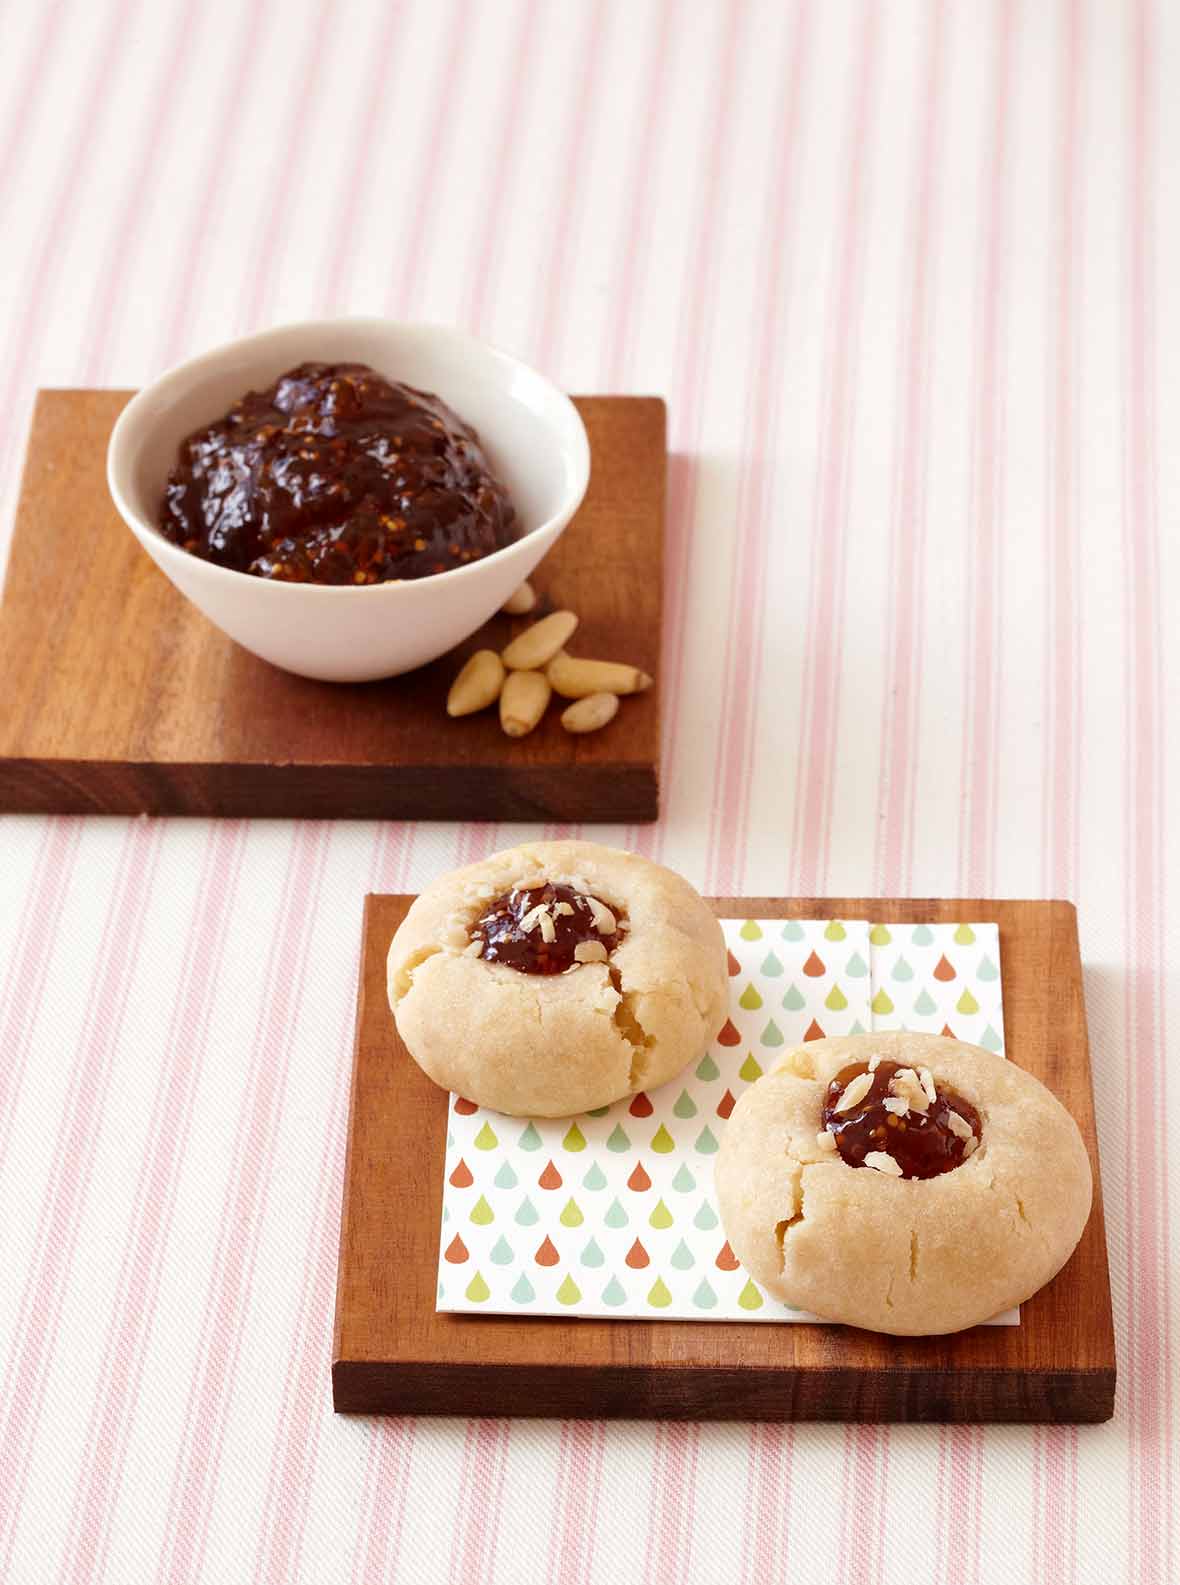 Mix-and-match thumbprint cookies on a wooden trivet in front of a bowl of jam and a few pine nuts.